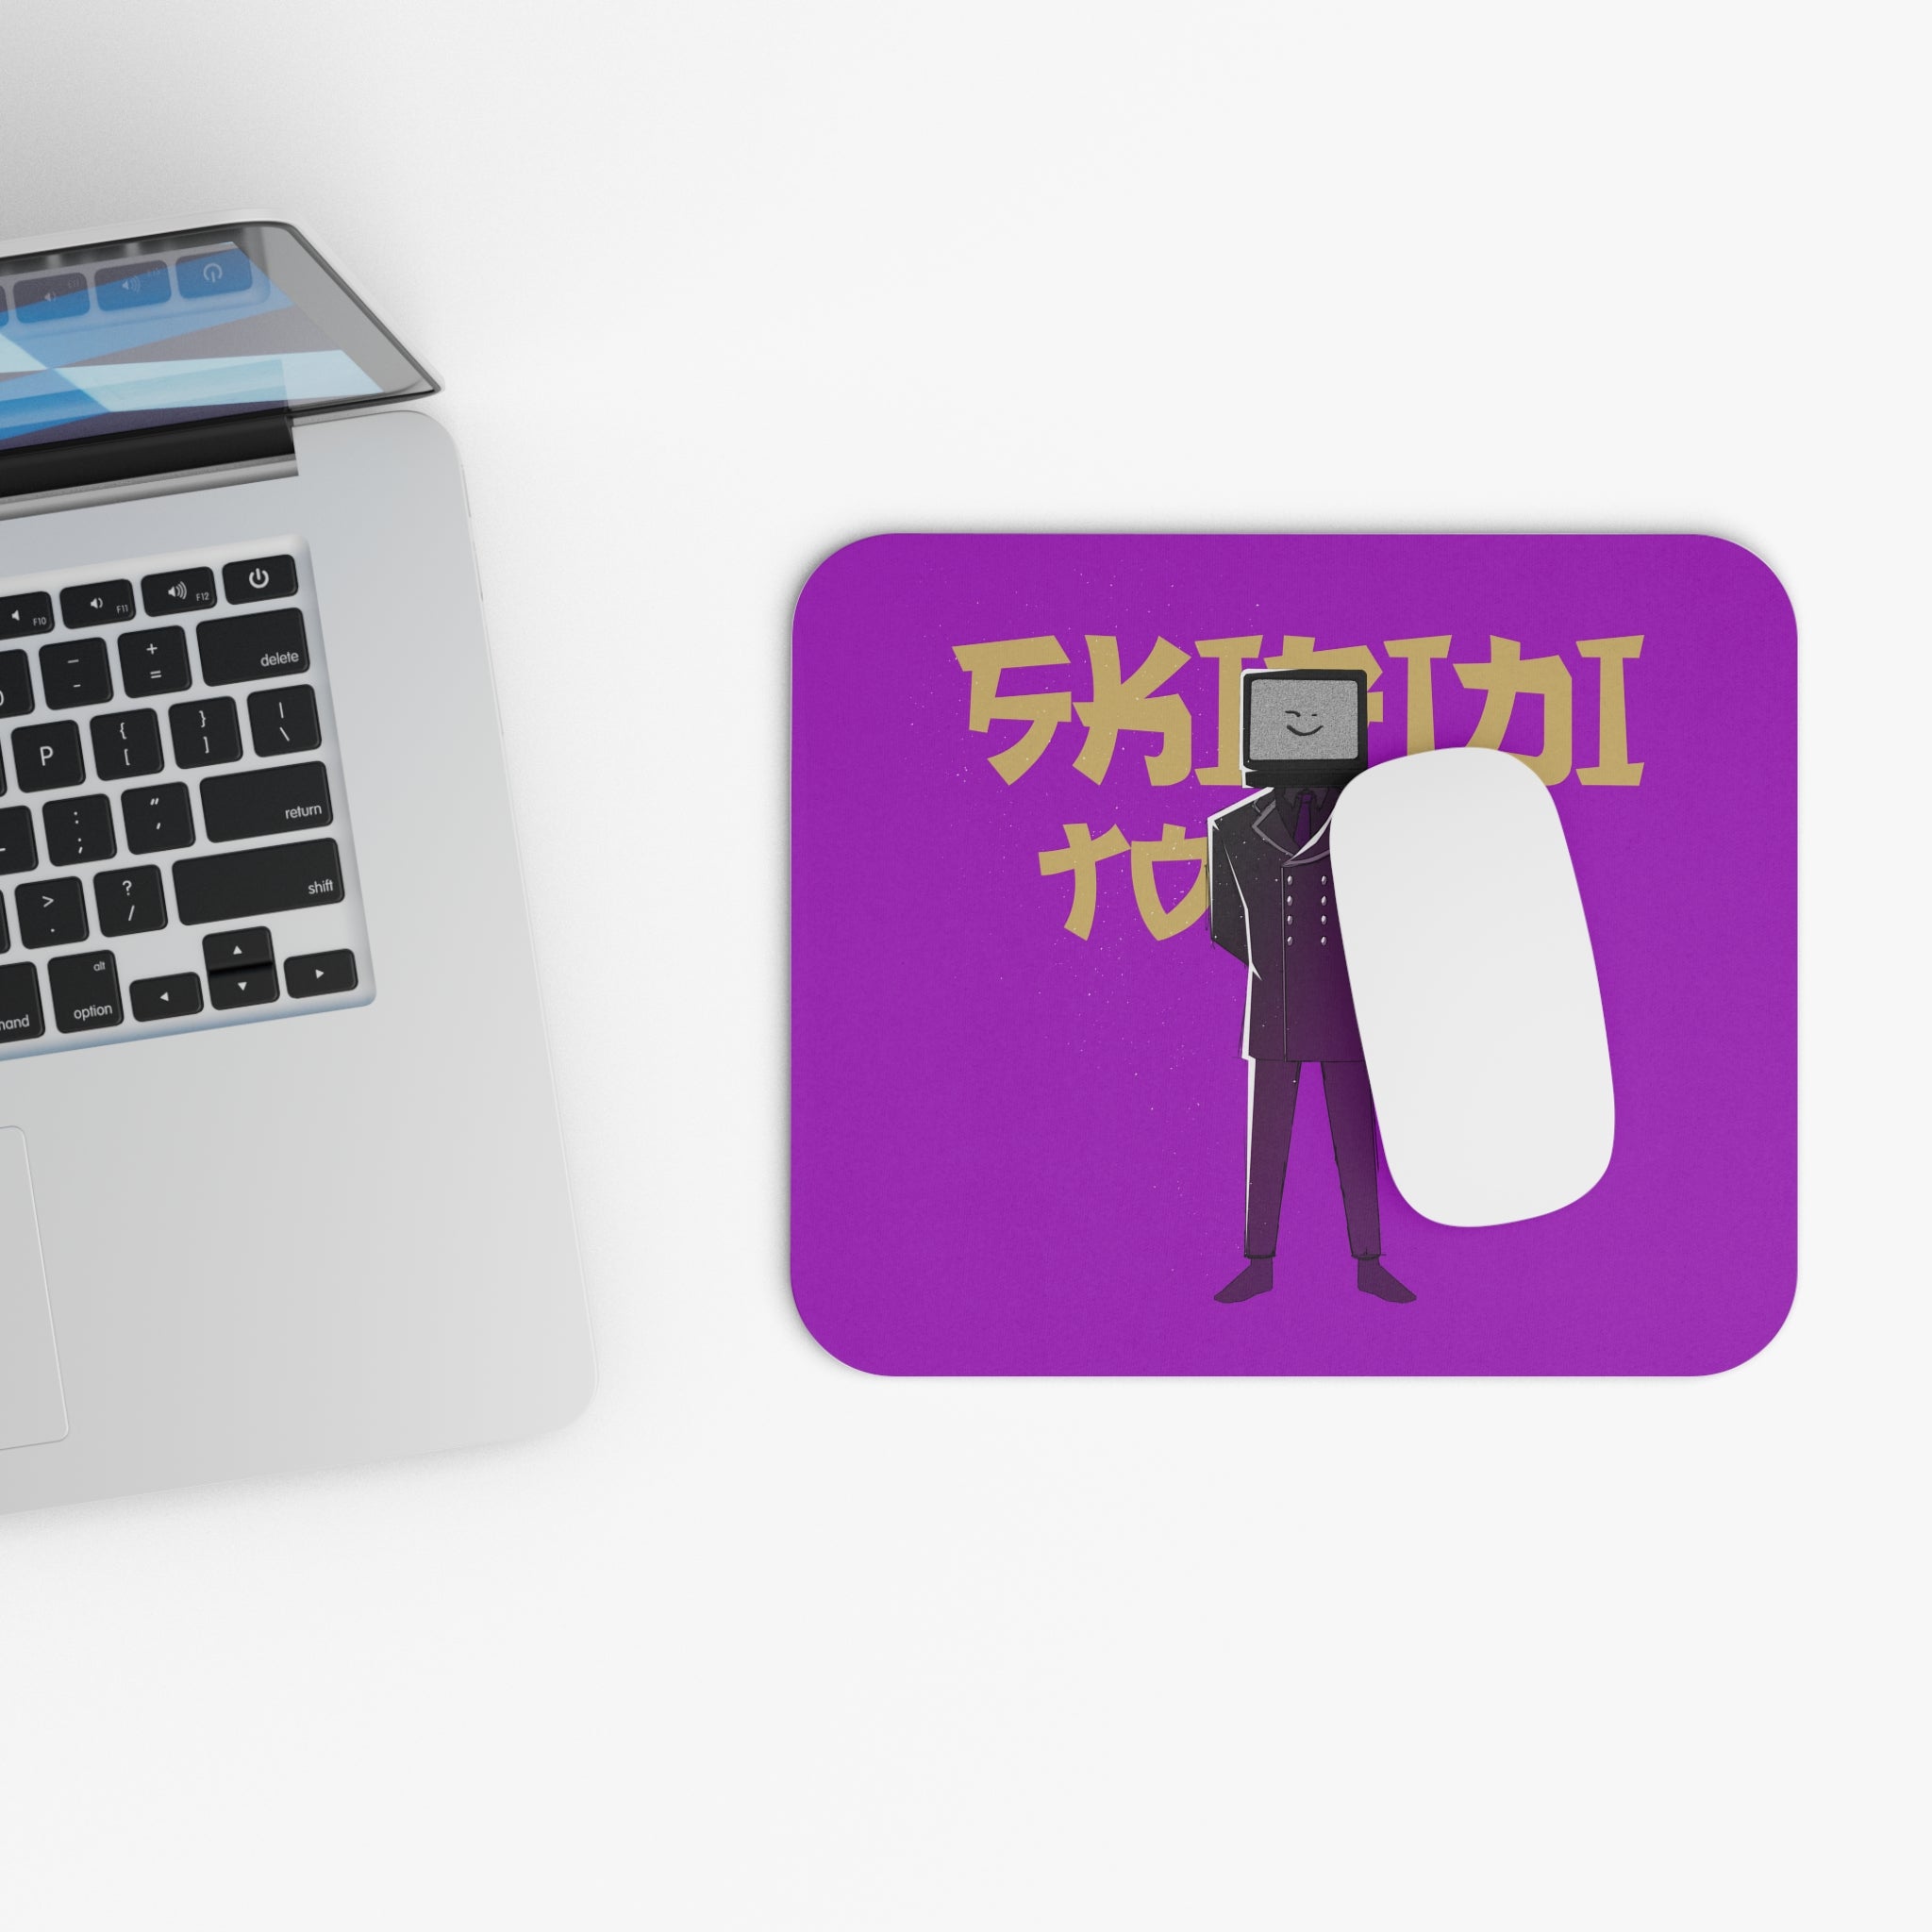 purple mousepad featuring TV Man and gold text with mouse and laptop